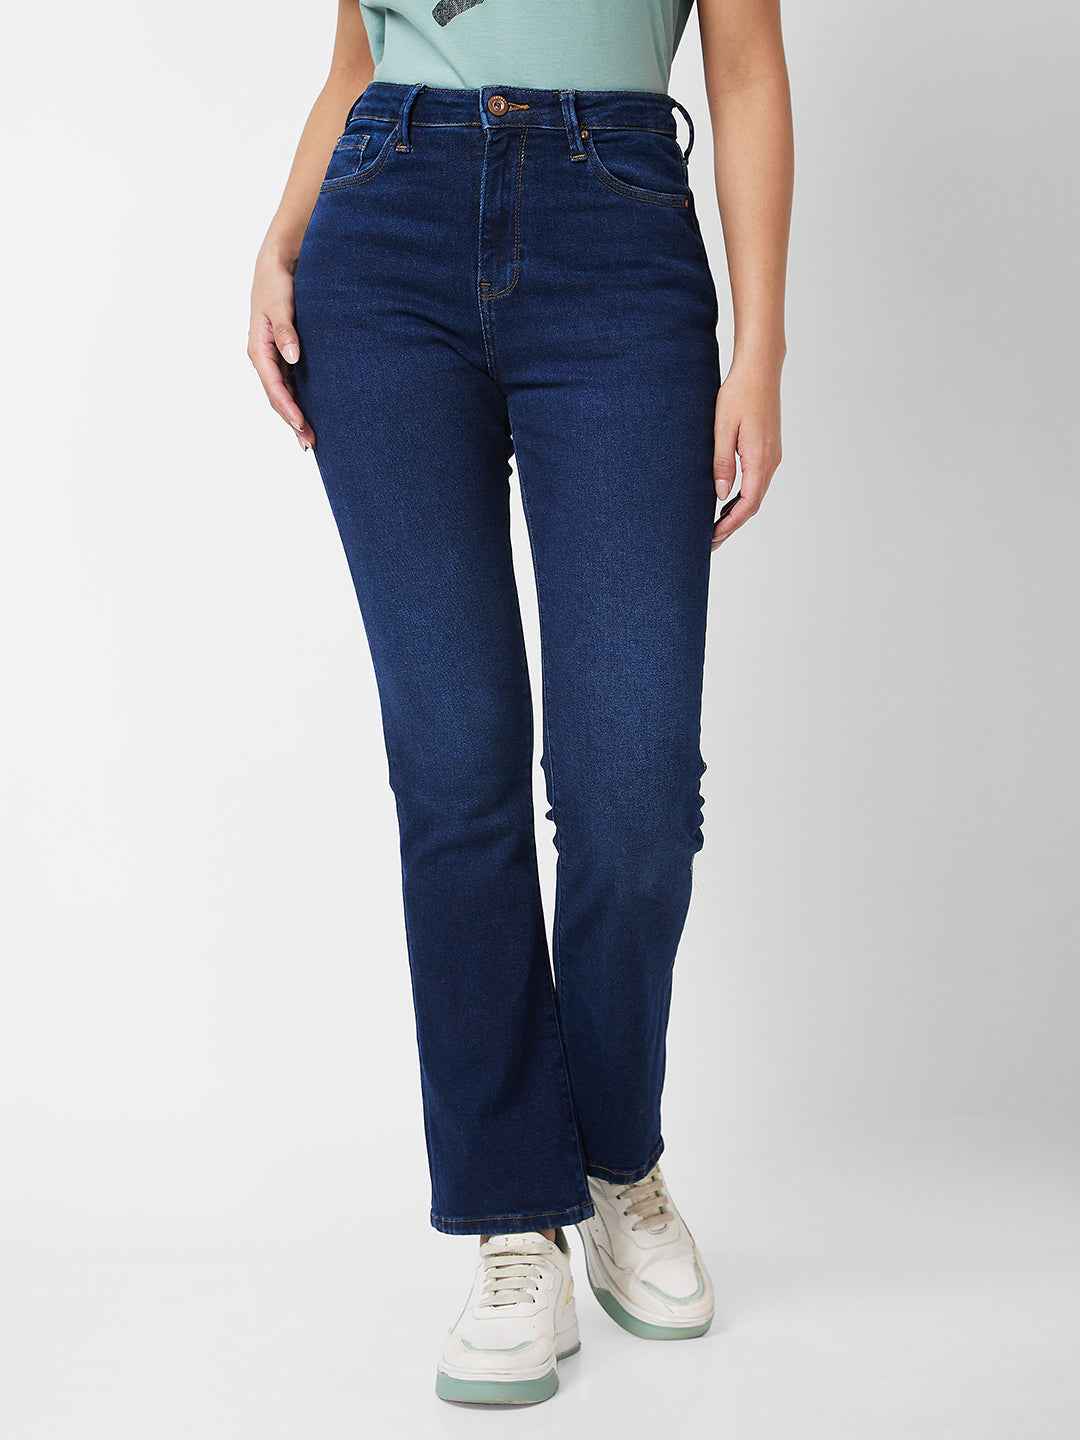 Spykar Mid Rise Bootcut Fit Blue Jeans For Women